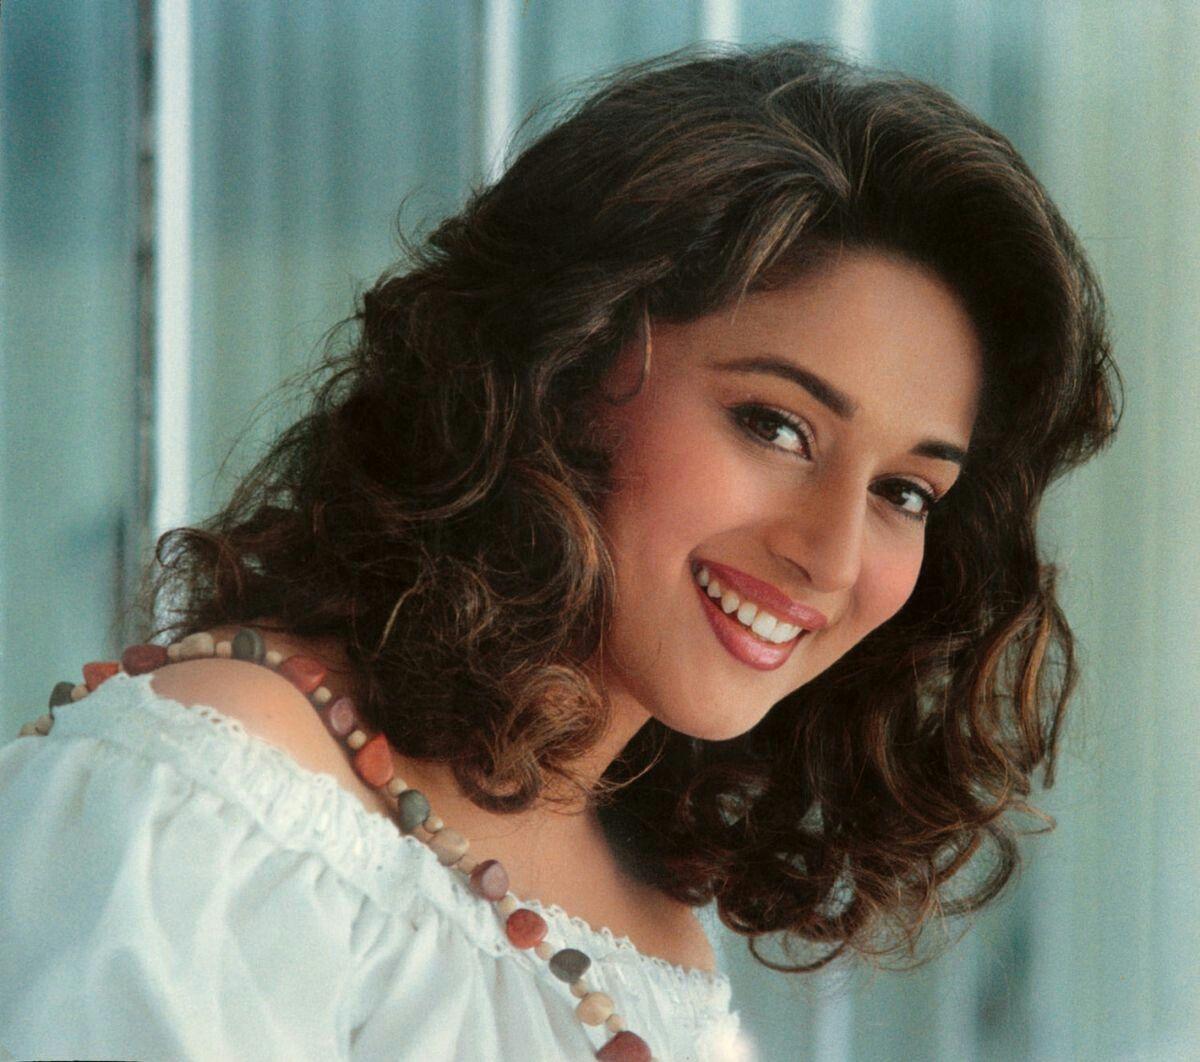 Madhuri Dixit Wallpapers - Top Free Madhuri Dixit Backgrounds ...